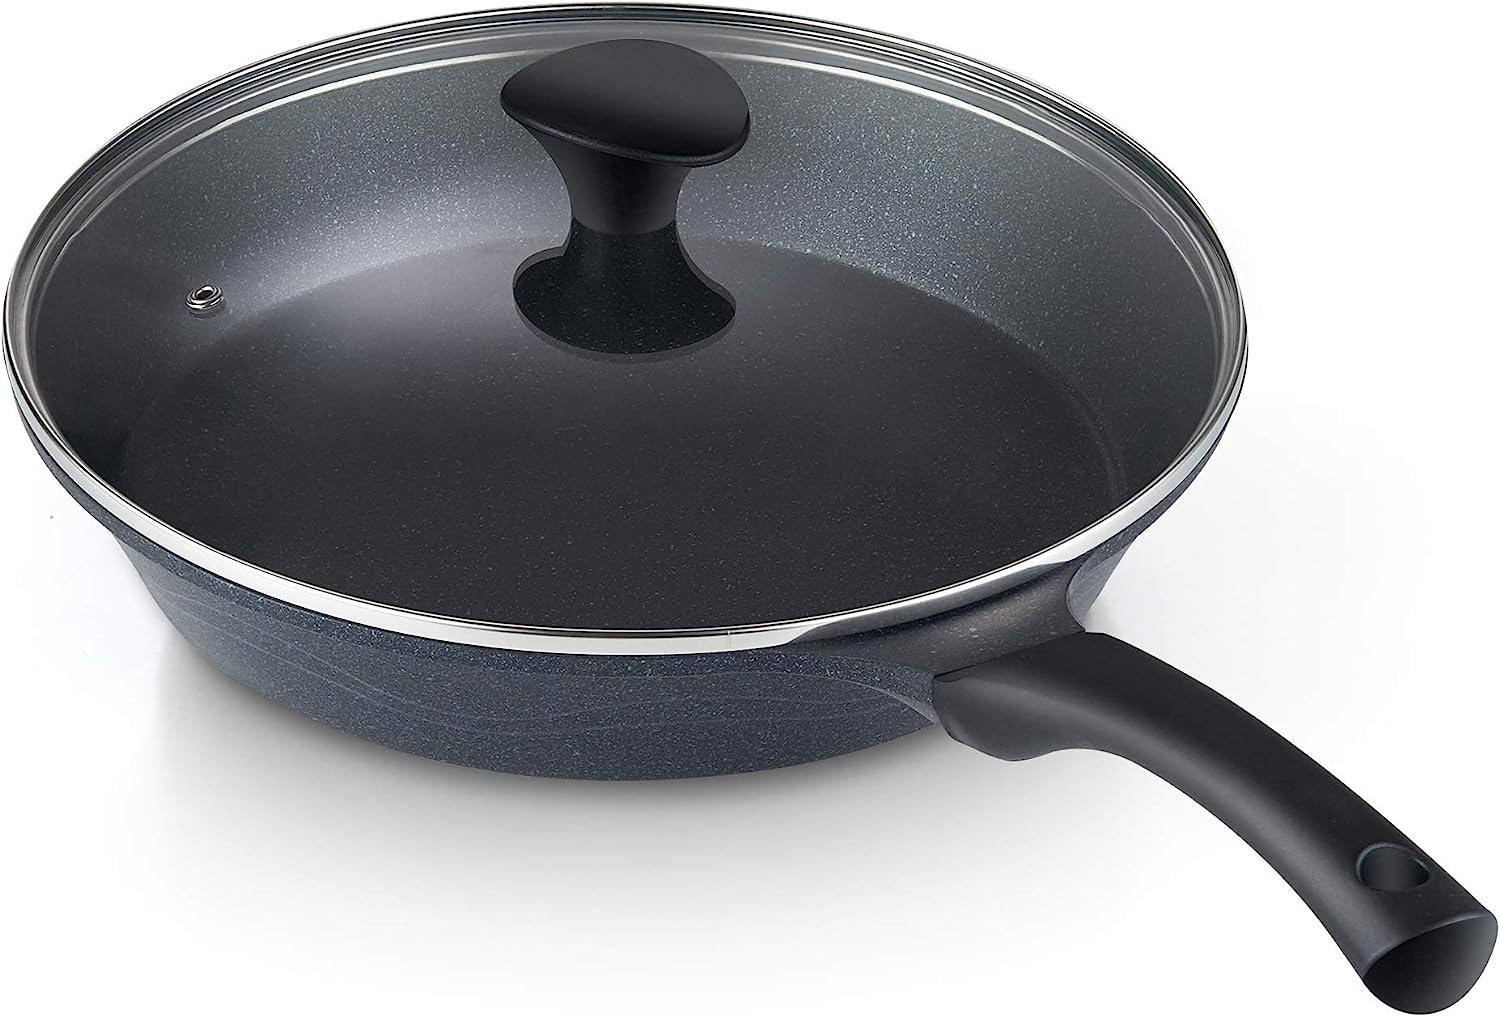 GRANITESTONE Frying Pan Nonstick, Warp-Free, with Glass Lid and Stay-cool  handles (11 inch)